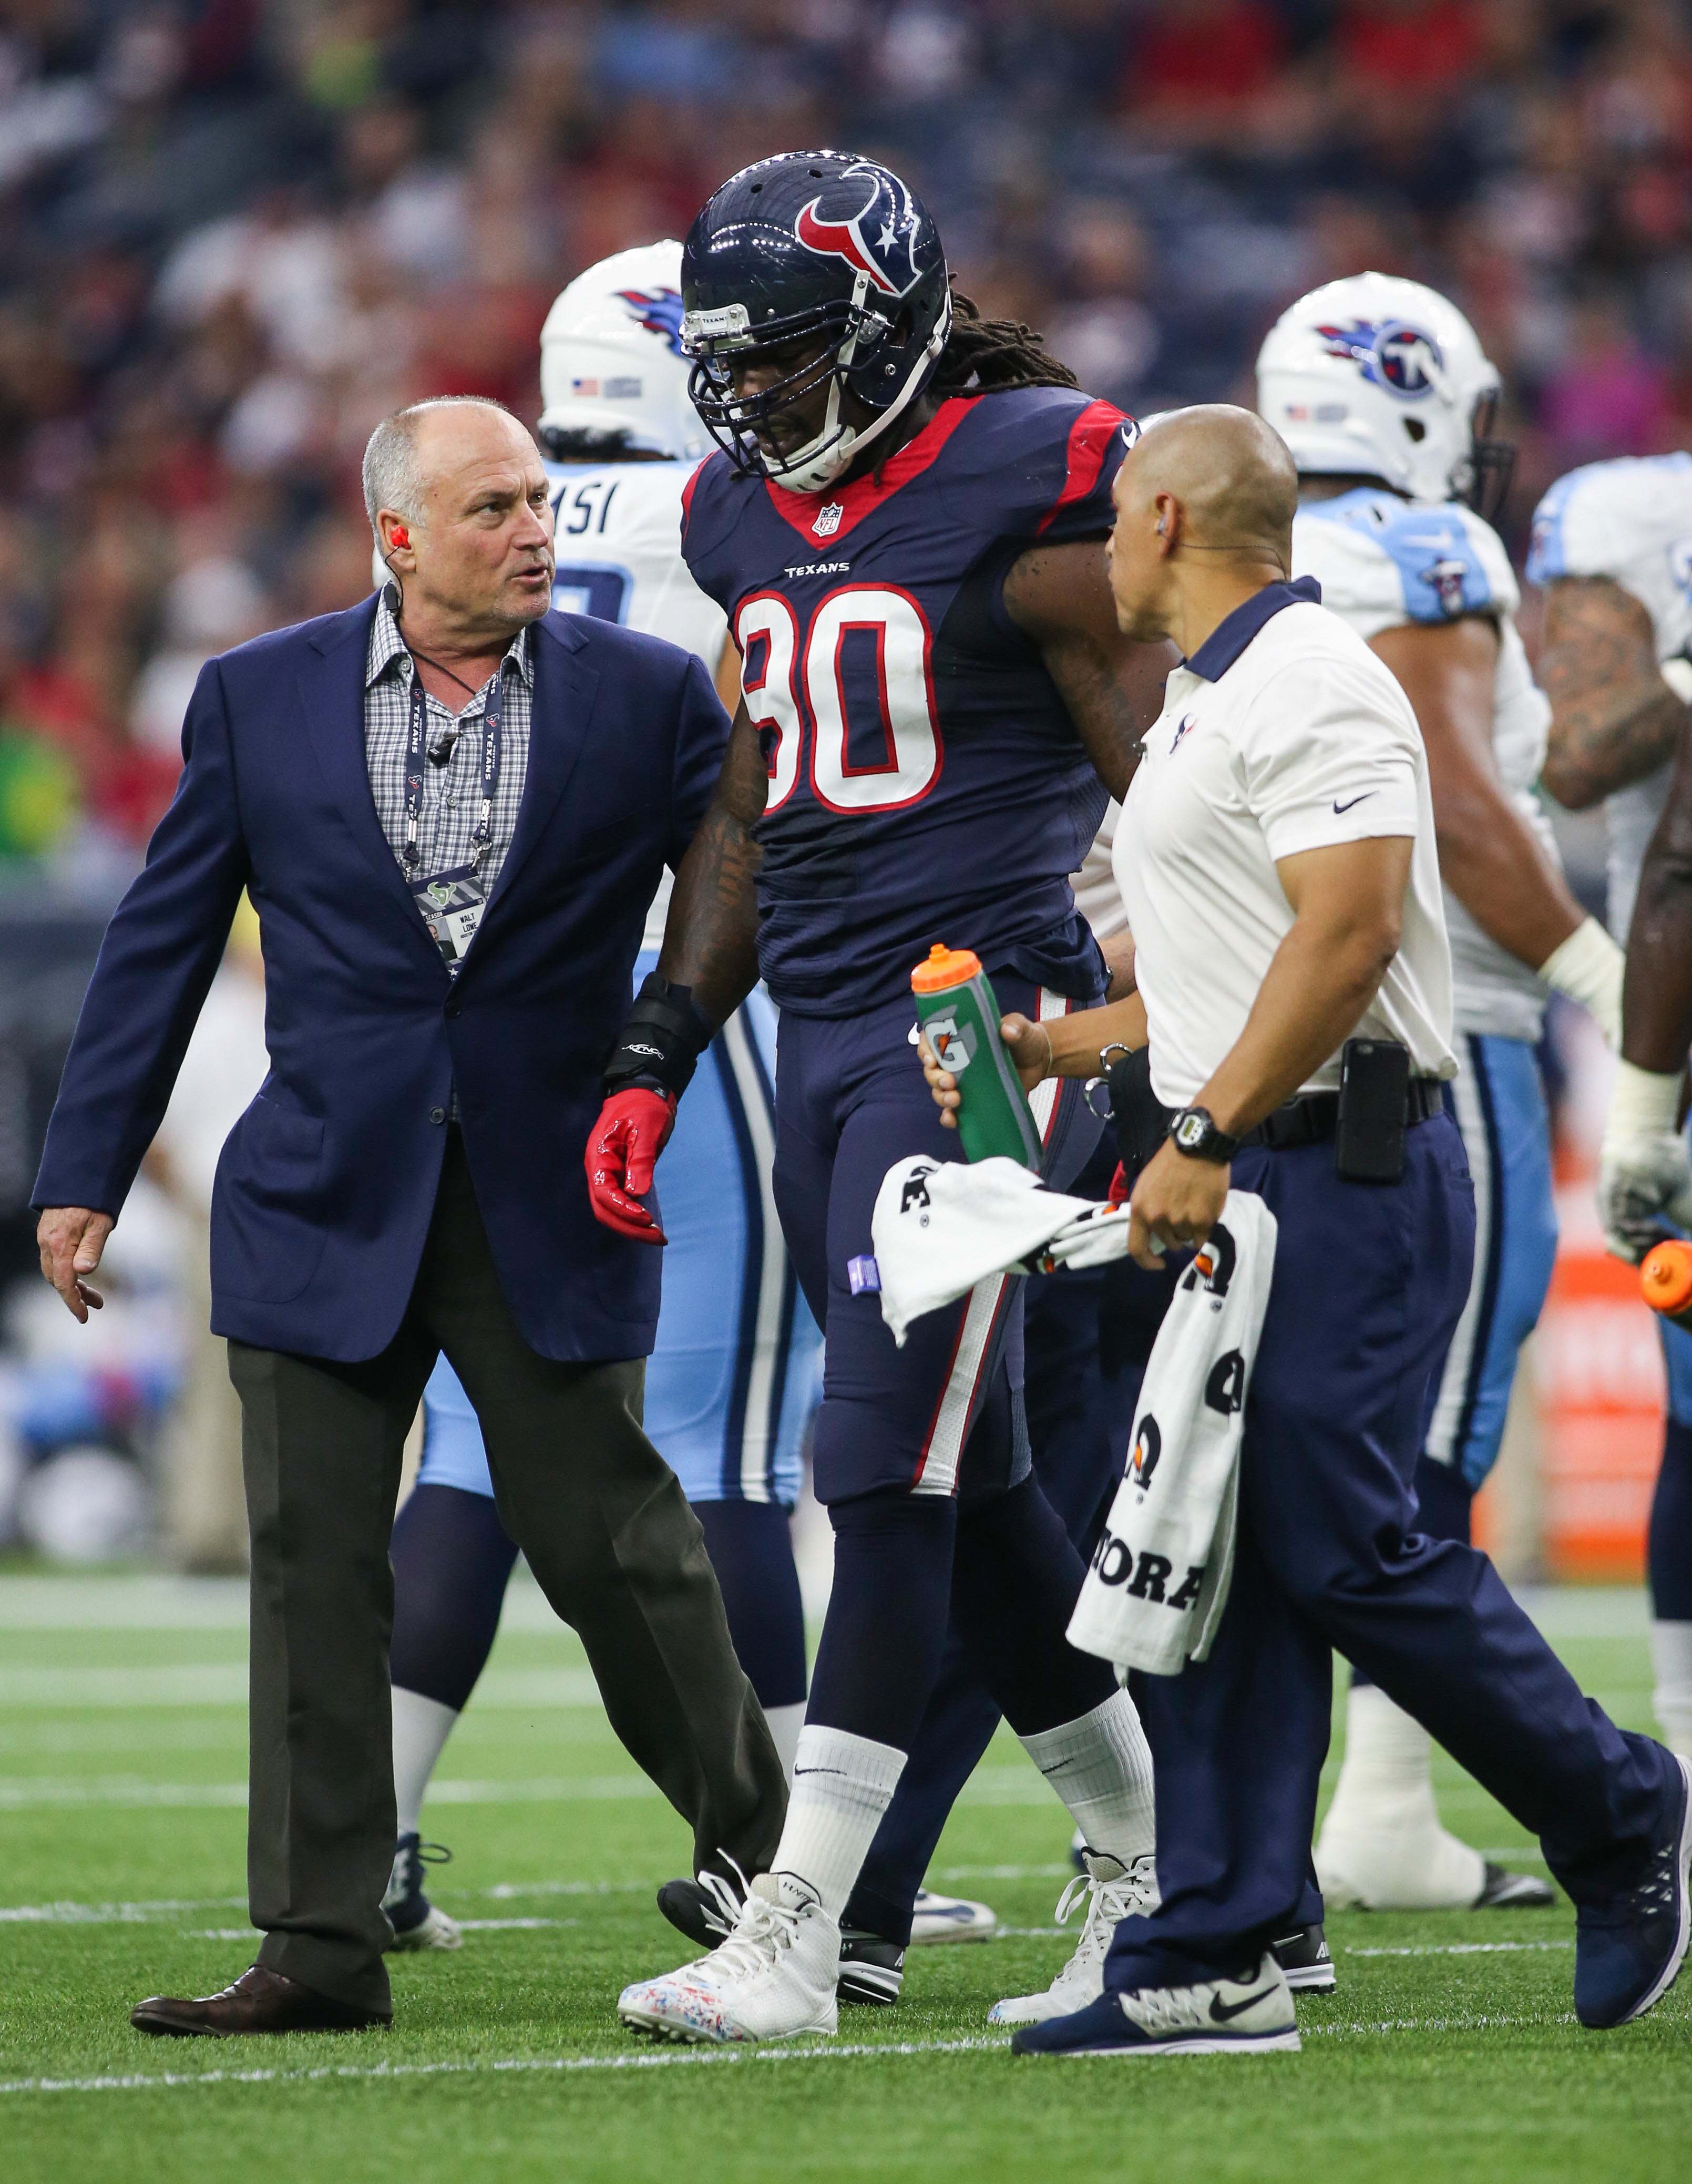 You probably won't see Clowney comin' on Monday night.